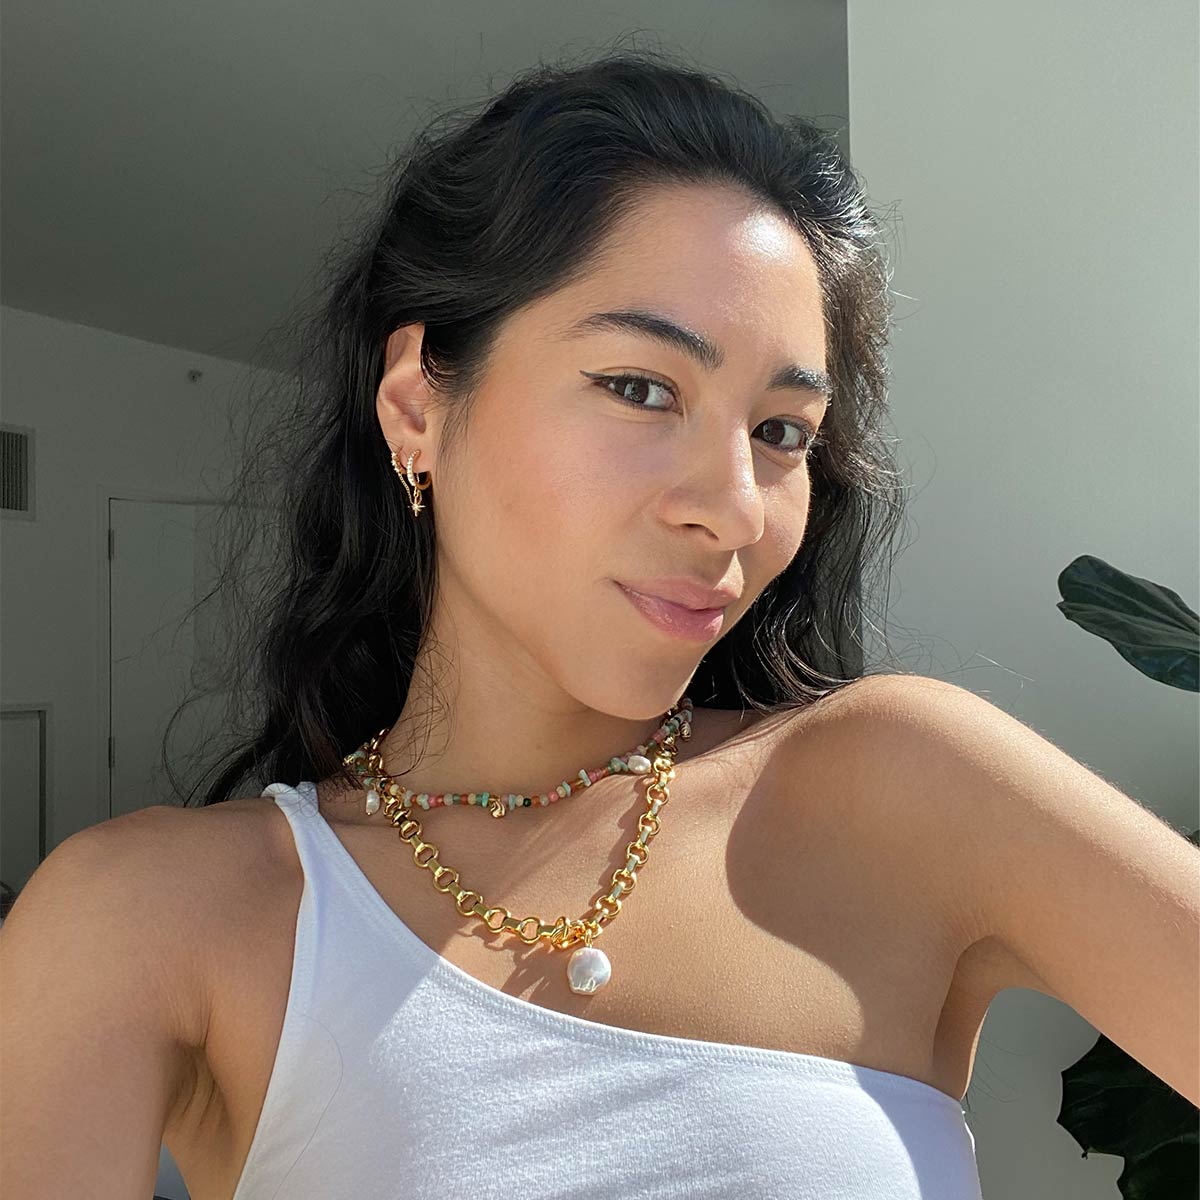 Serenity Pearl Link Chain Necklace in Gold worn by Emily Chussy